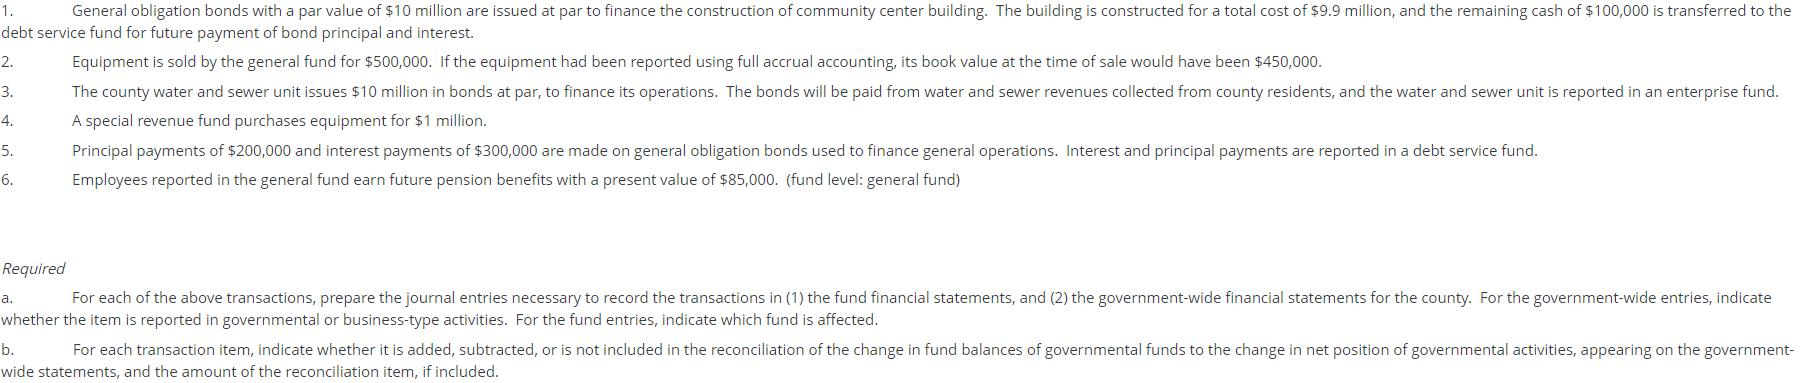 1. General obligation bonds with a par value of $10 million are issued at par to finance the construction of community center